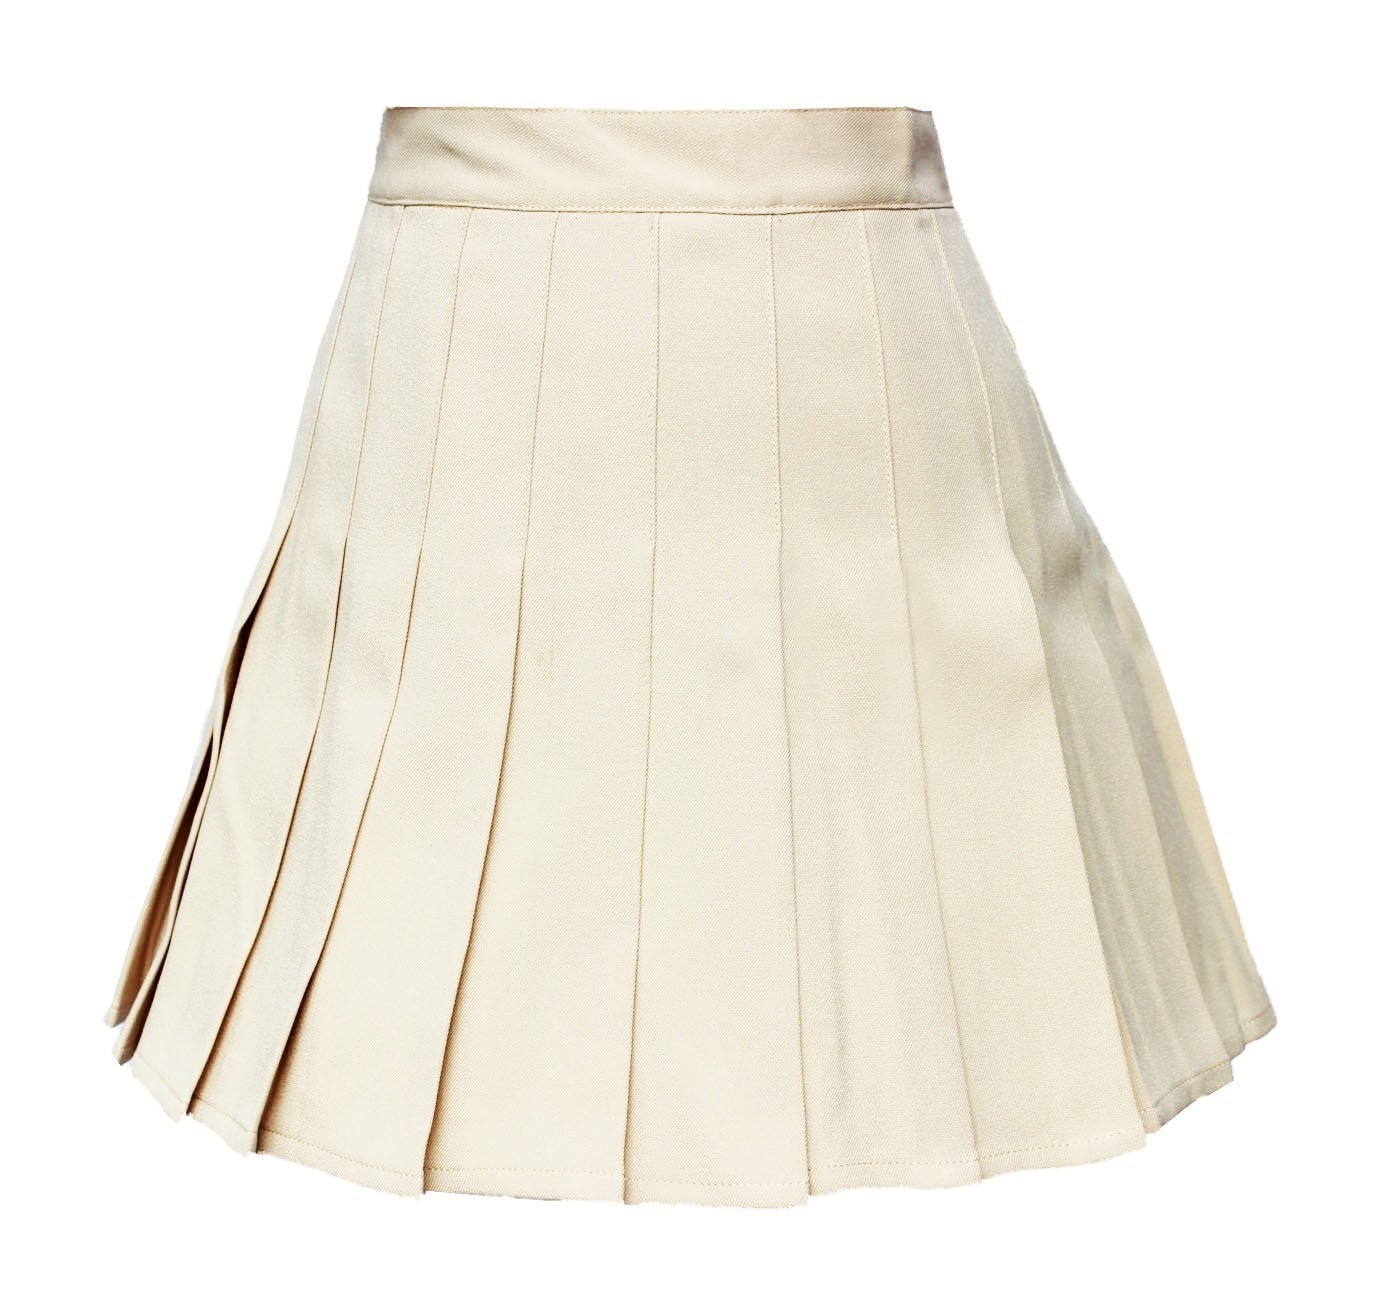 Primary image for Women High Waist Solid Pleated Plus size Single Tennis Skirts (XL, Khaki)